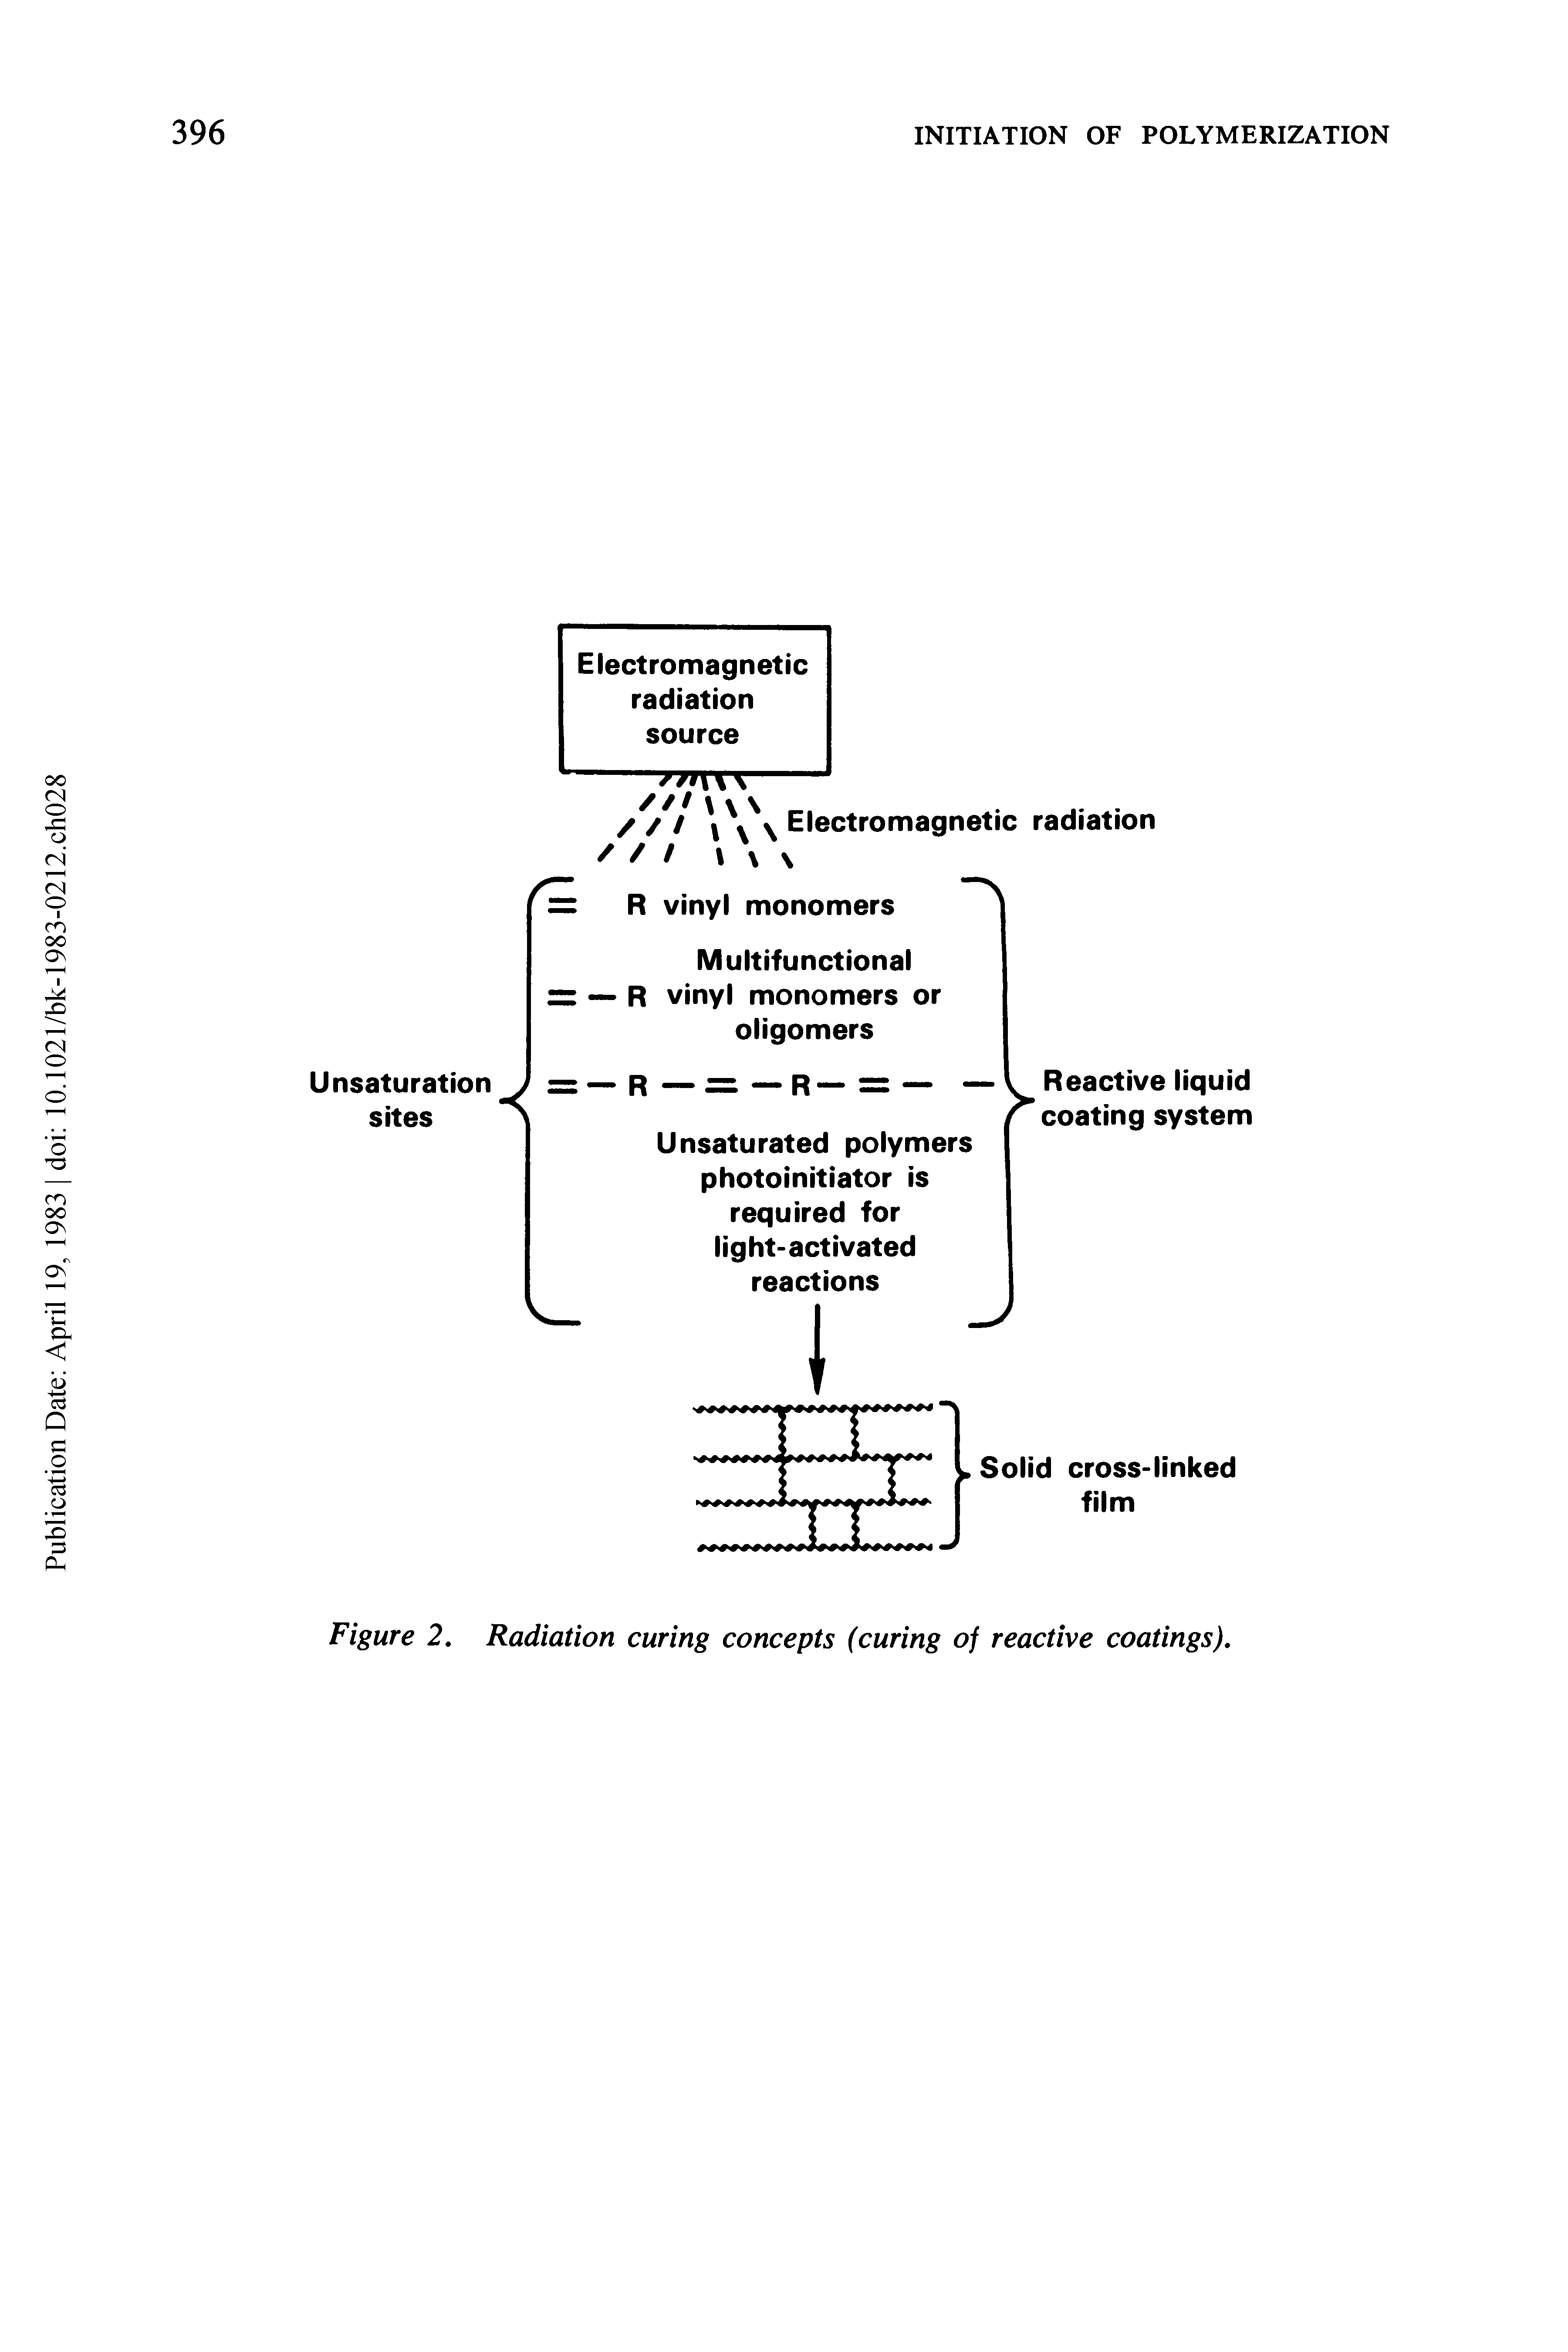 Figure 2. Radiation curing concepts (curing of reactive coatings).